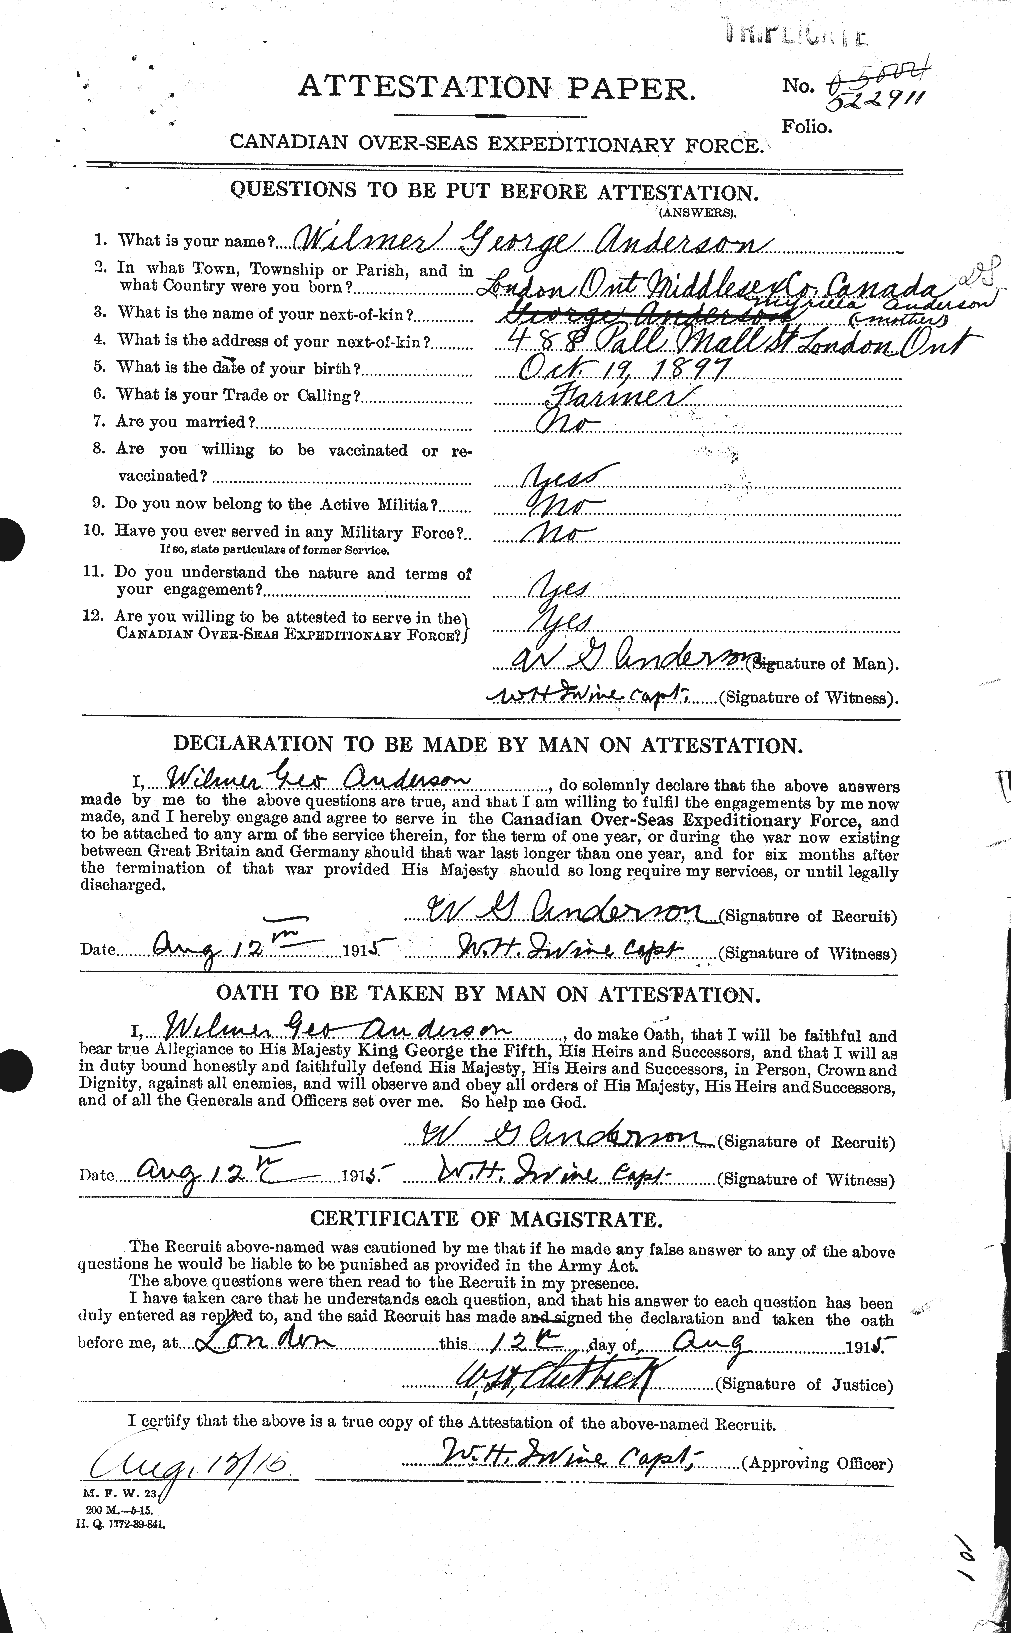 Personnel Records of the First World War - CEF 210664a